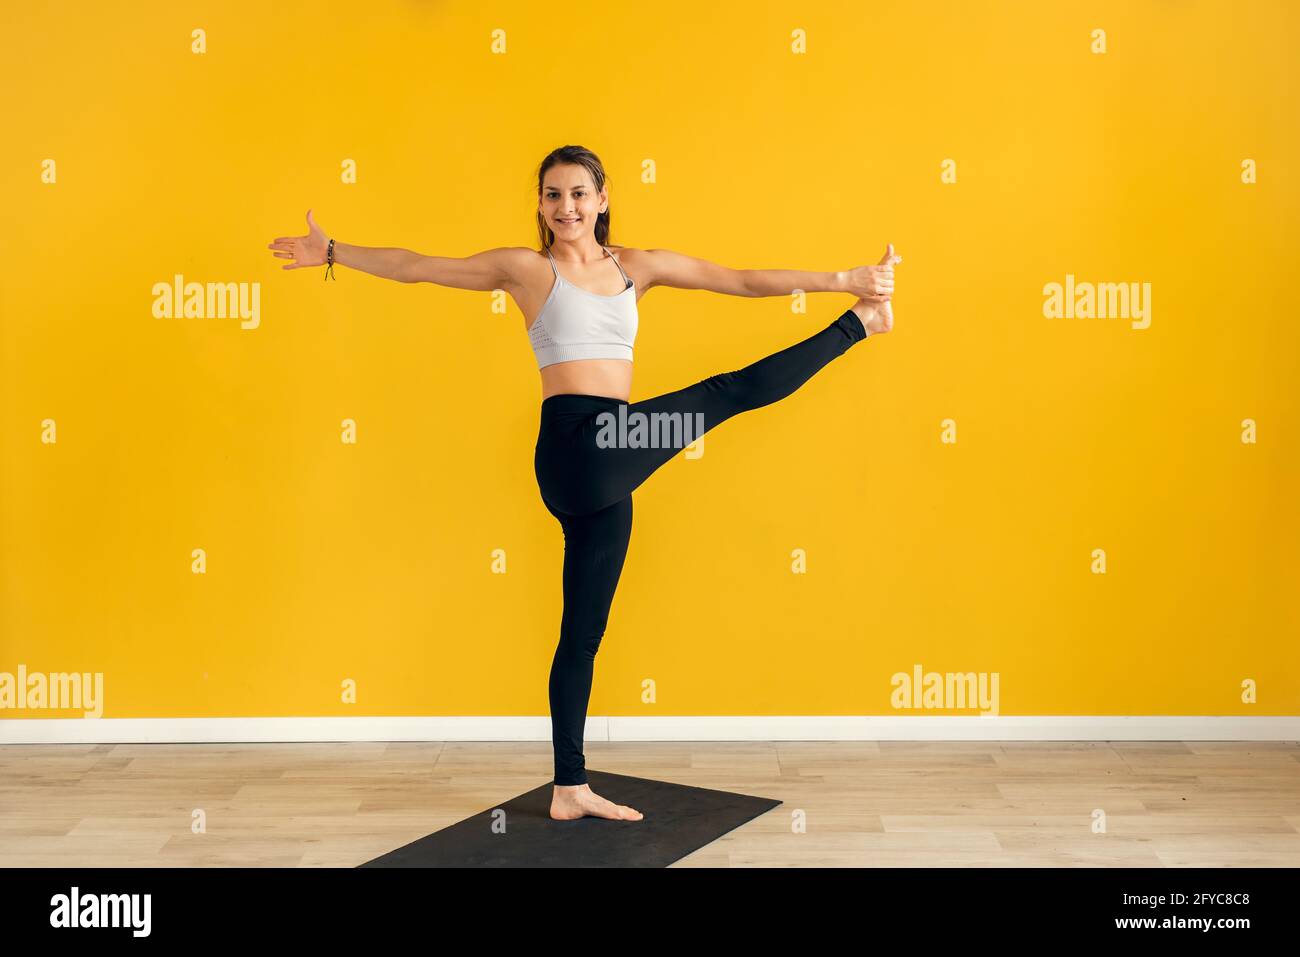 Vertical Portrait of Peaceful Young Woman in White Sportswear Balancing on  One Leg with Raised Arm in Tree Pose Relaxing Stock Image - Image of  female, eyes: 283081633